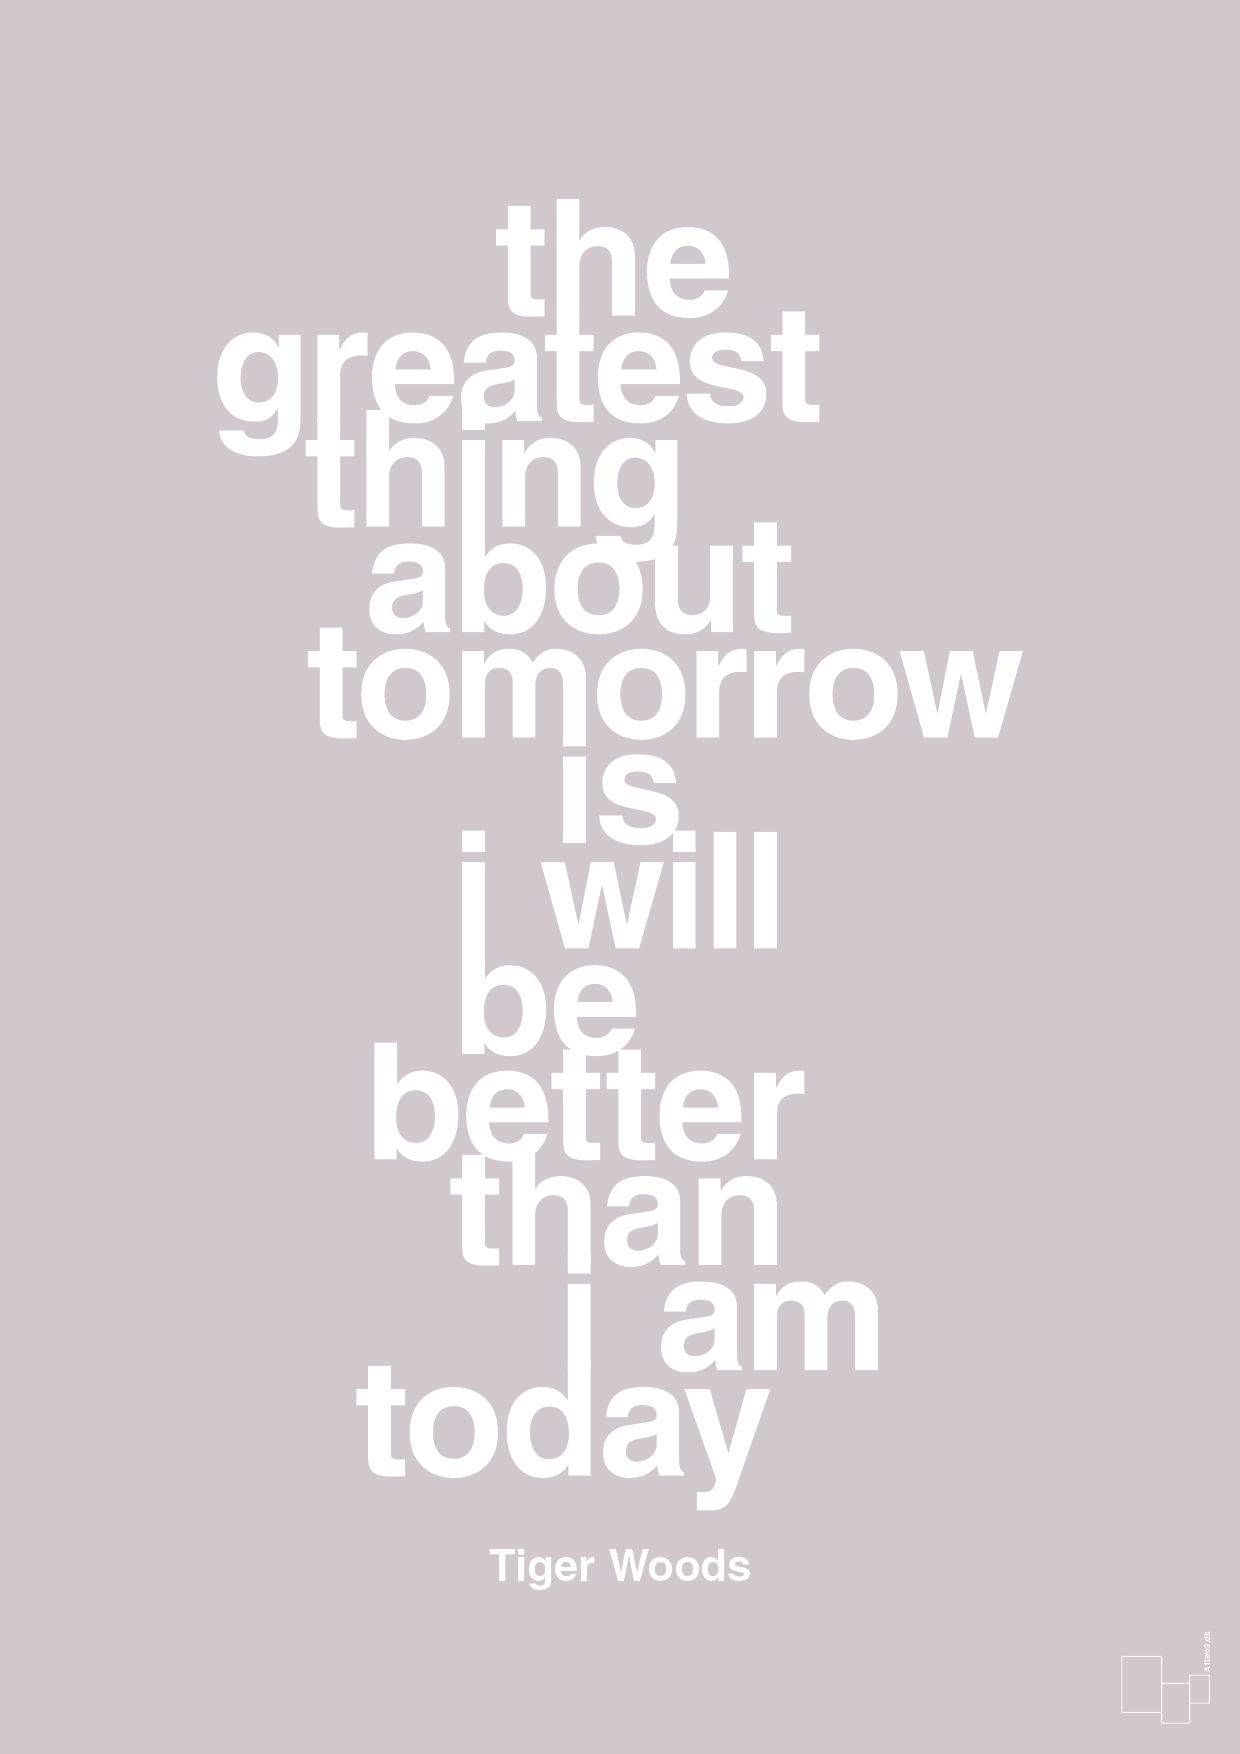 the greatest thing about tomorrow is i will be better than i am today - Plakat med Citater i Dusty Lilac